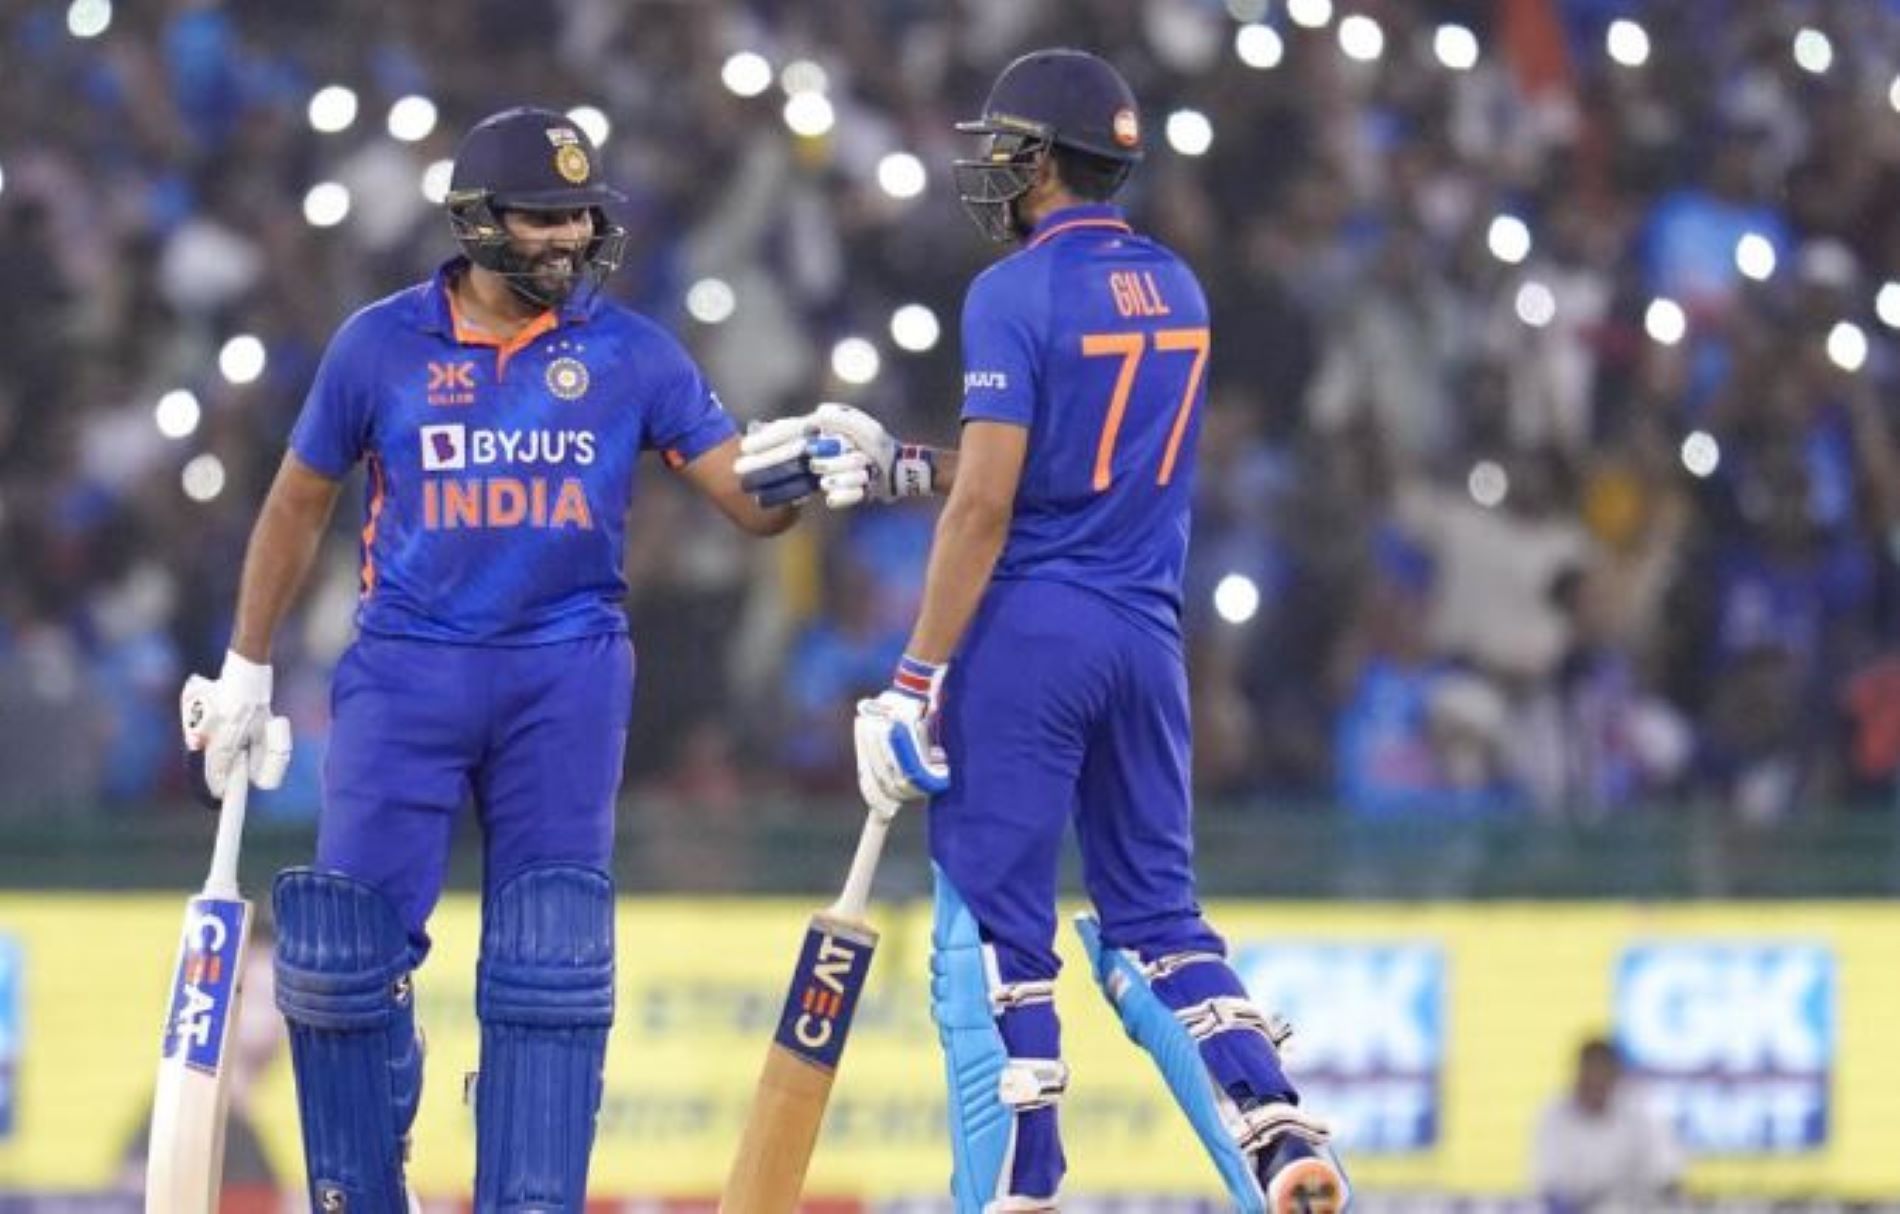 Rohit Sharma and Shubman Gill will be entrusted to get India off to solid starts in the World Cup